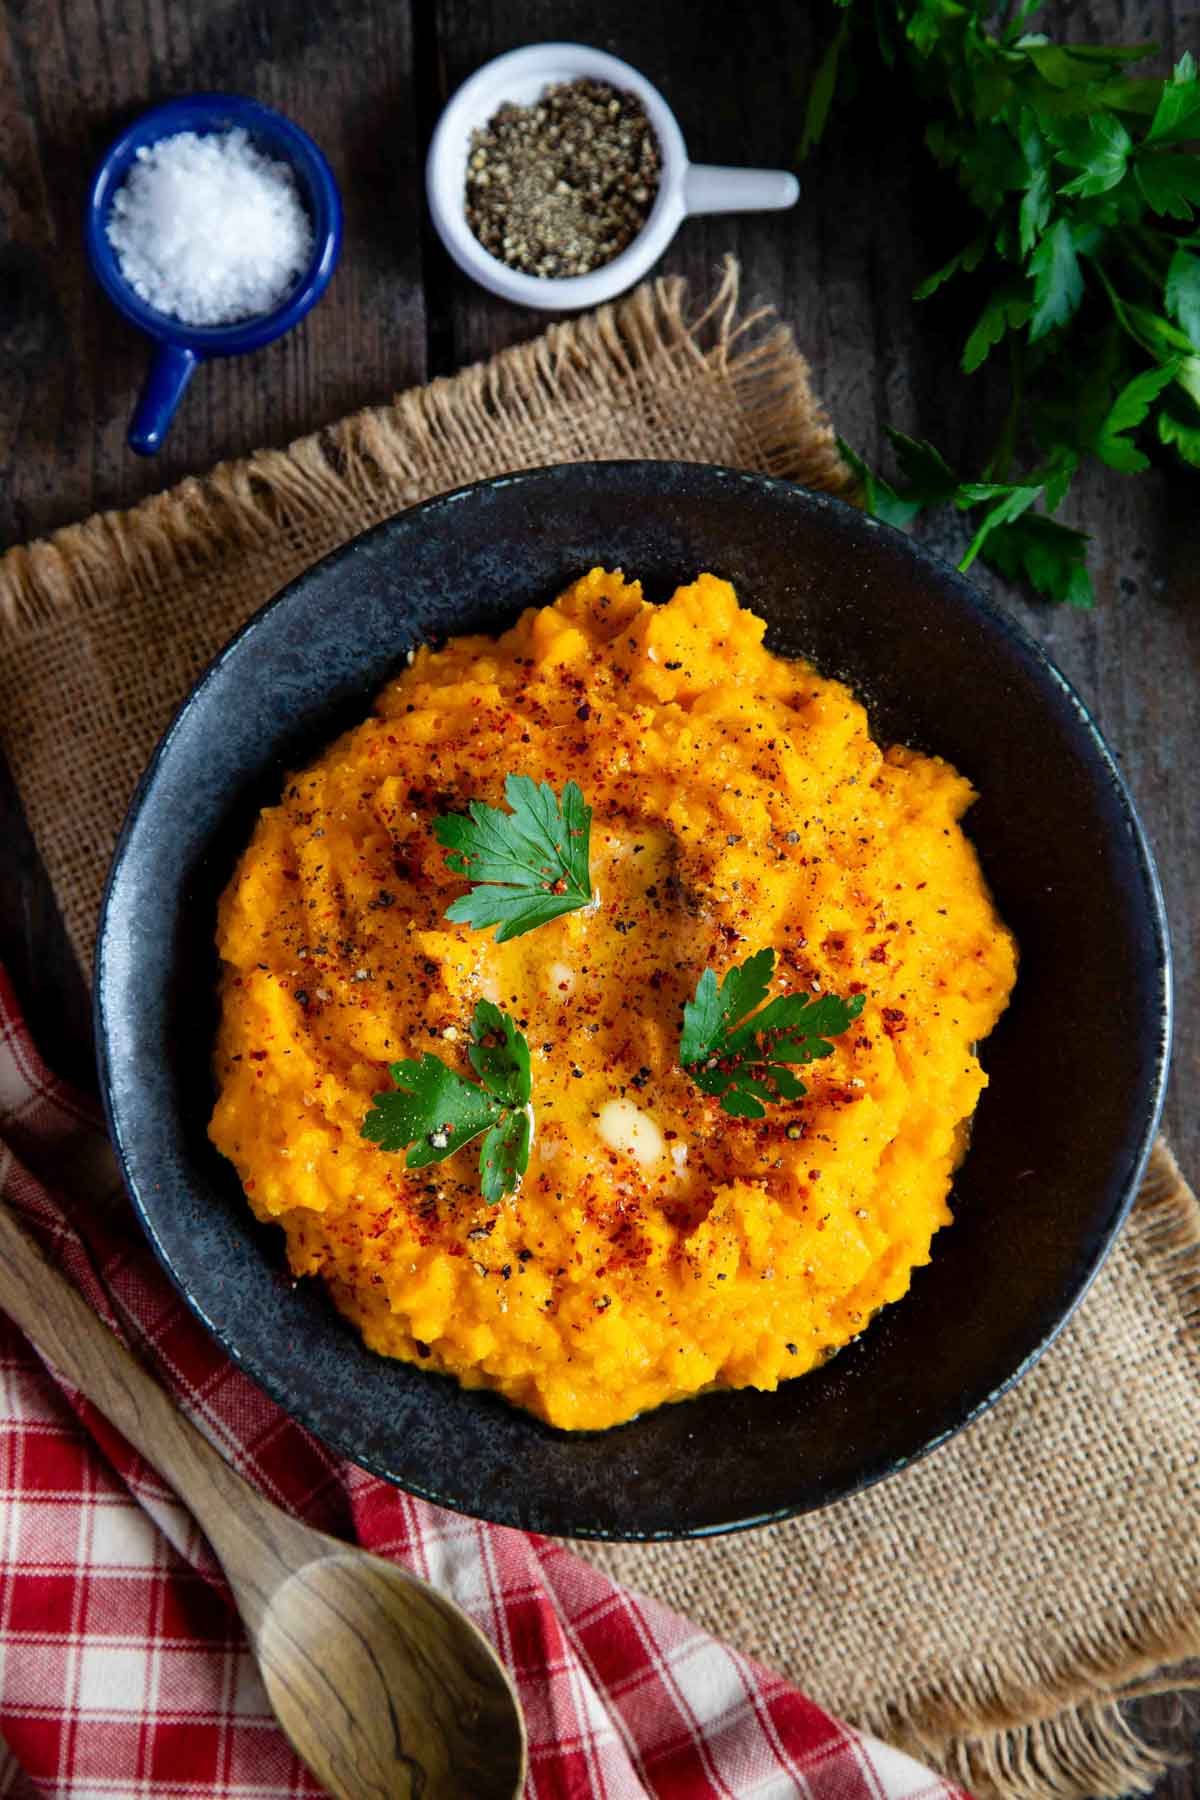 Carrot and swede mash, a delicious golden orange vegetable side, vibrant against a dark serving bowl and garnished with parsley.